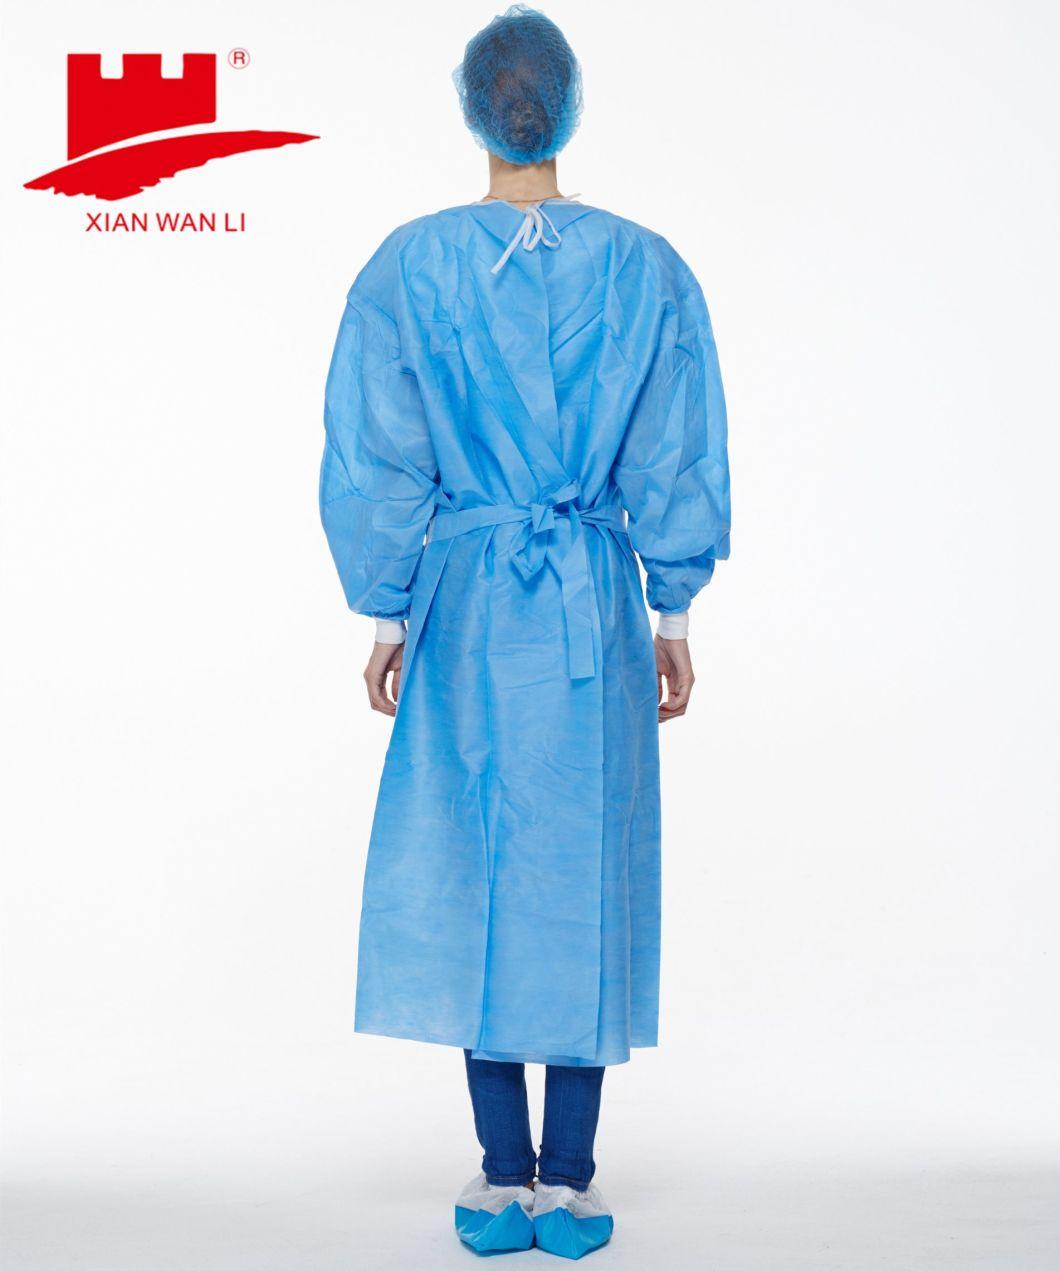 Non-Woven Fabric Surgical Gown/Disposable Dental Gown